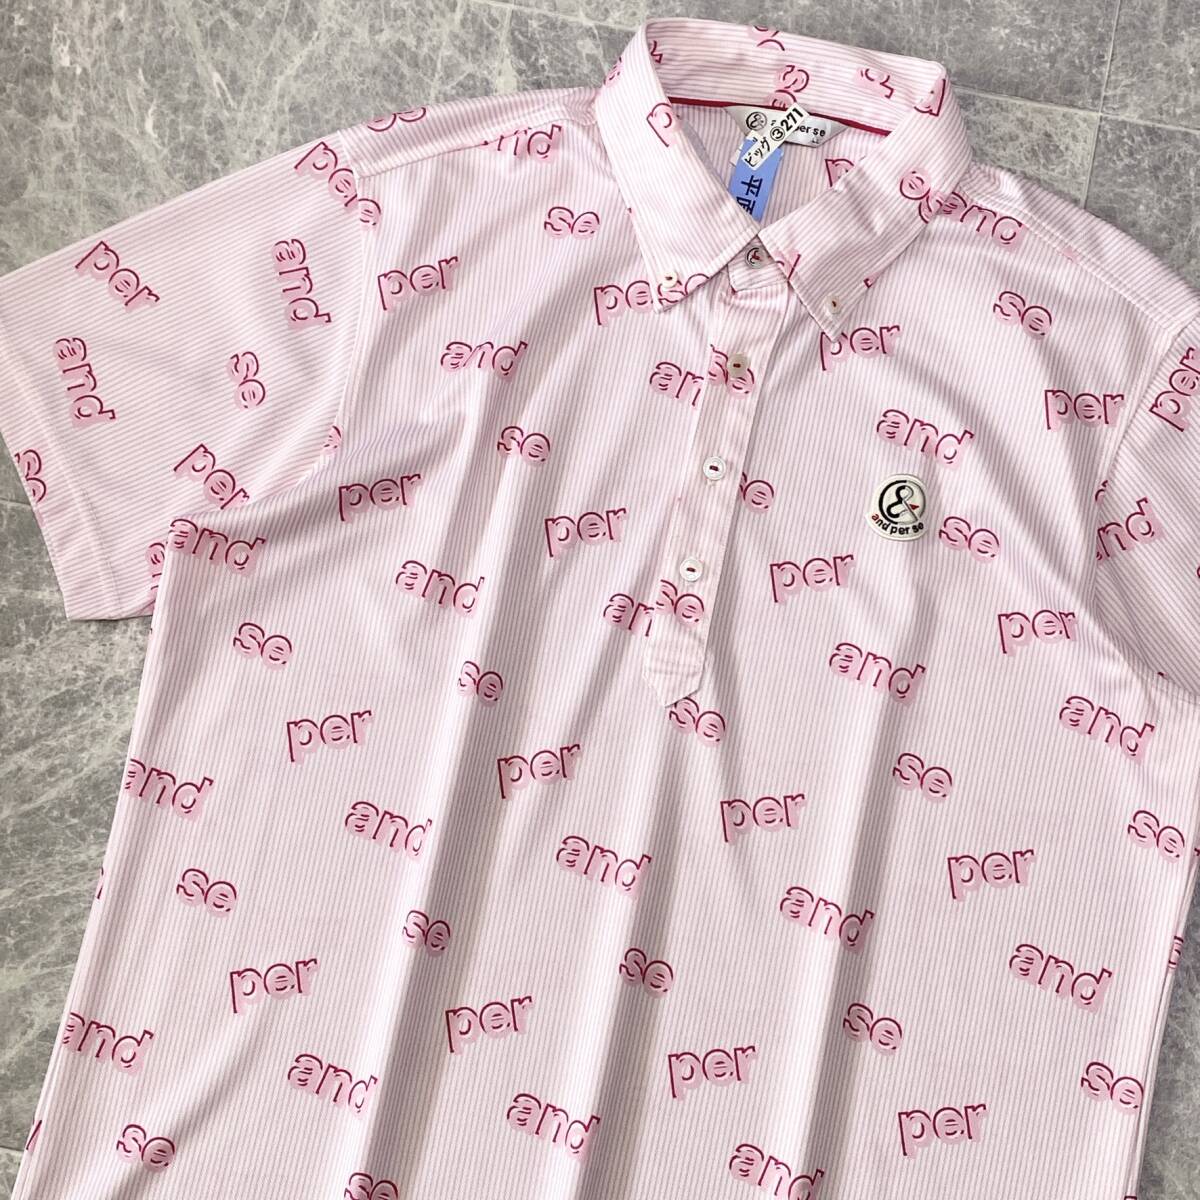  unused class and per se Anne Pas . short sleeves button down polo-shirt stretch . water speed . men's LL pink total pattern Golf wear Black&White 457